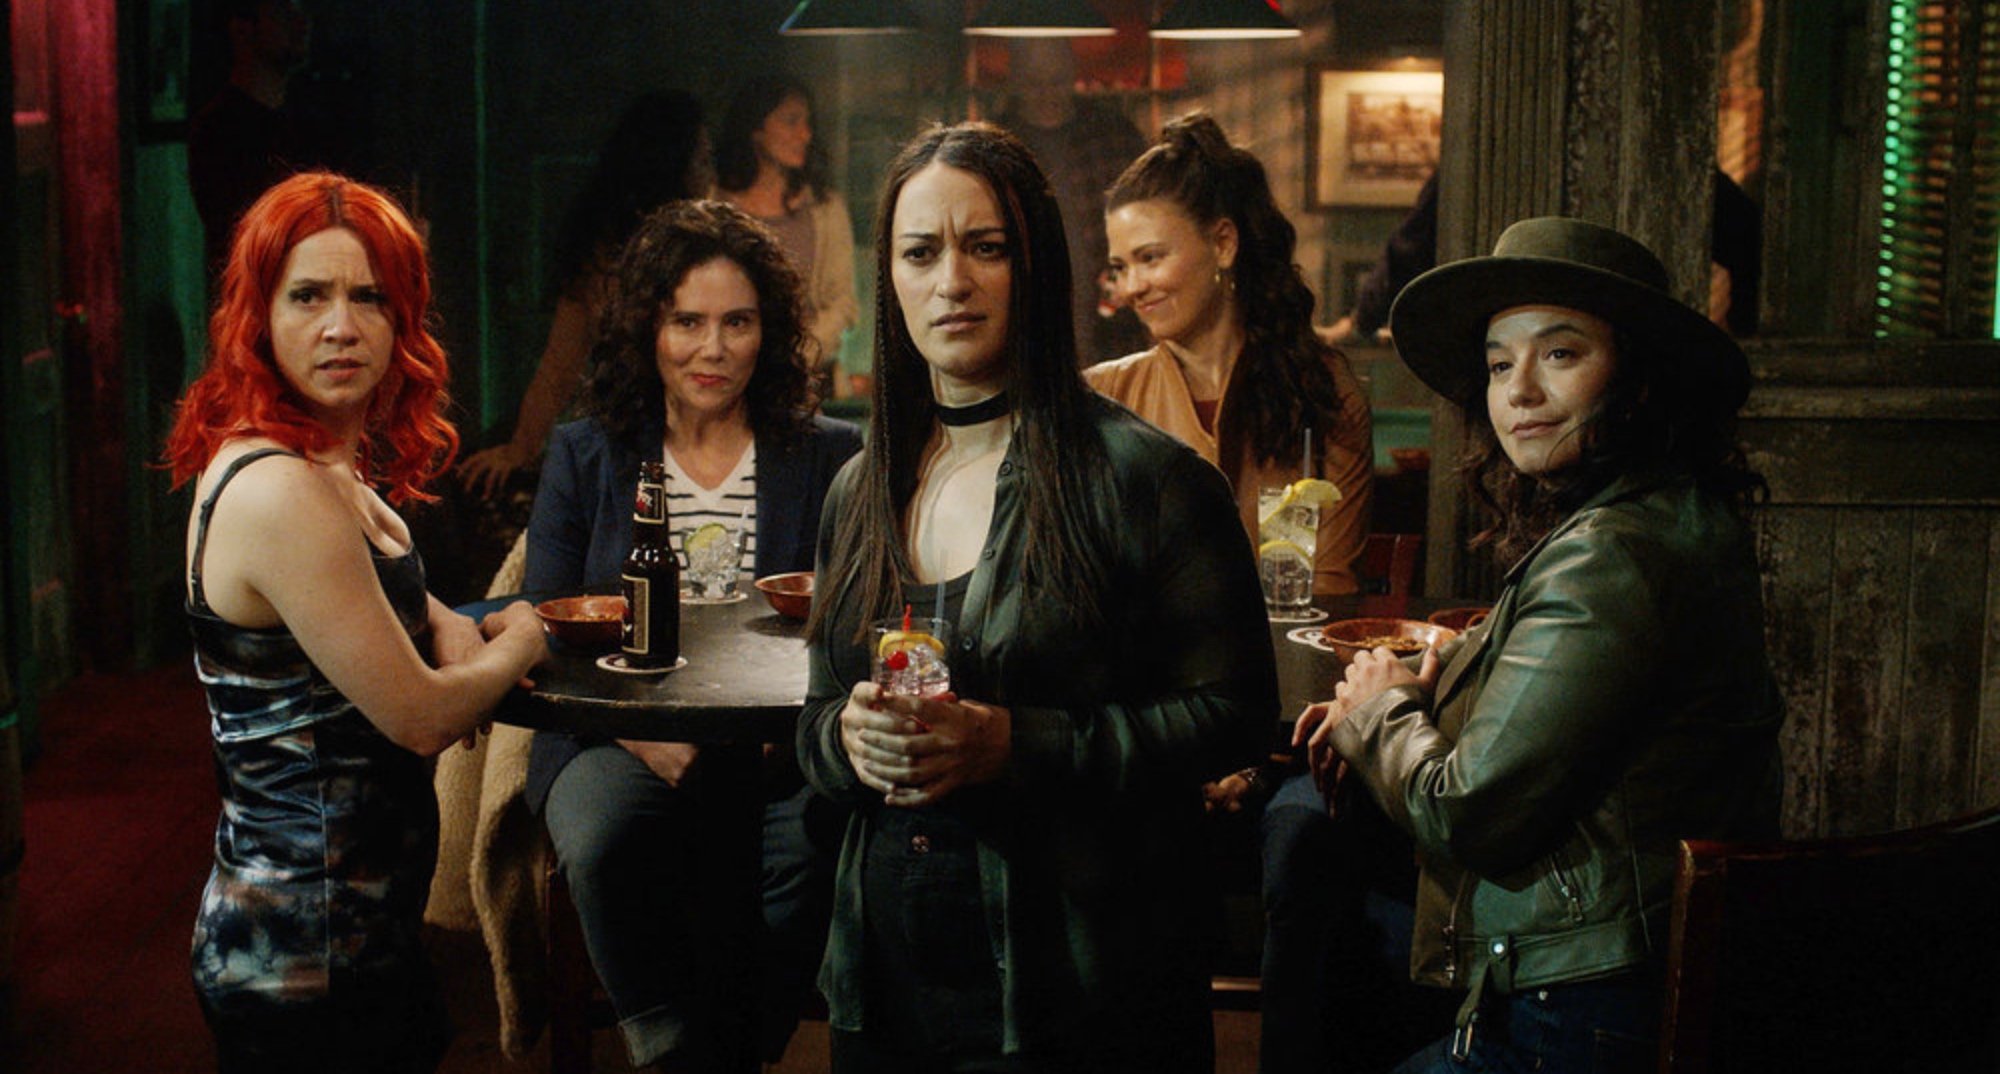 'Resident Alien' Season 2 Episode 3 'Girls' Night with main female characters in bar.